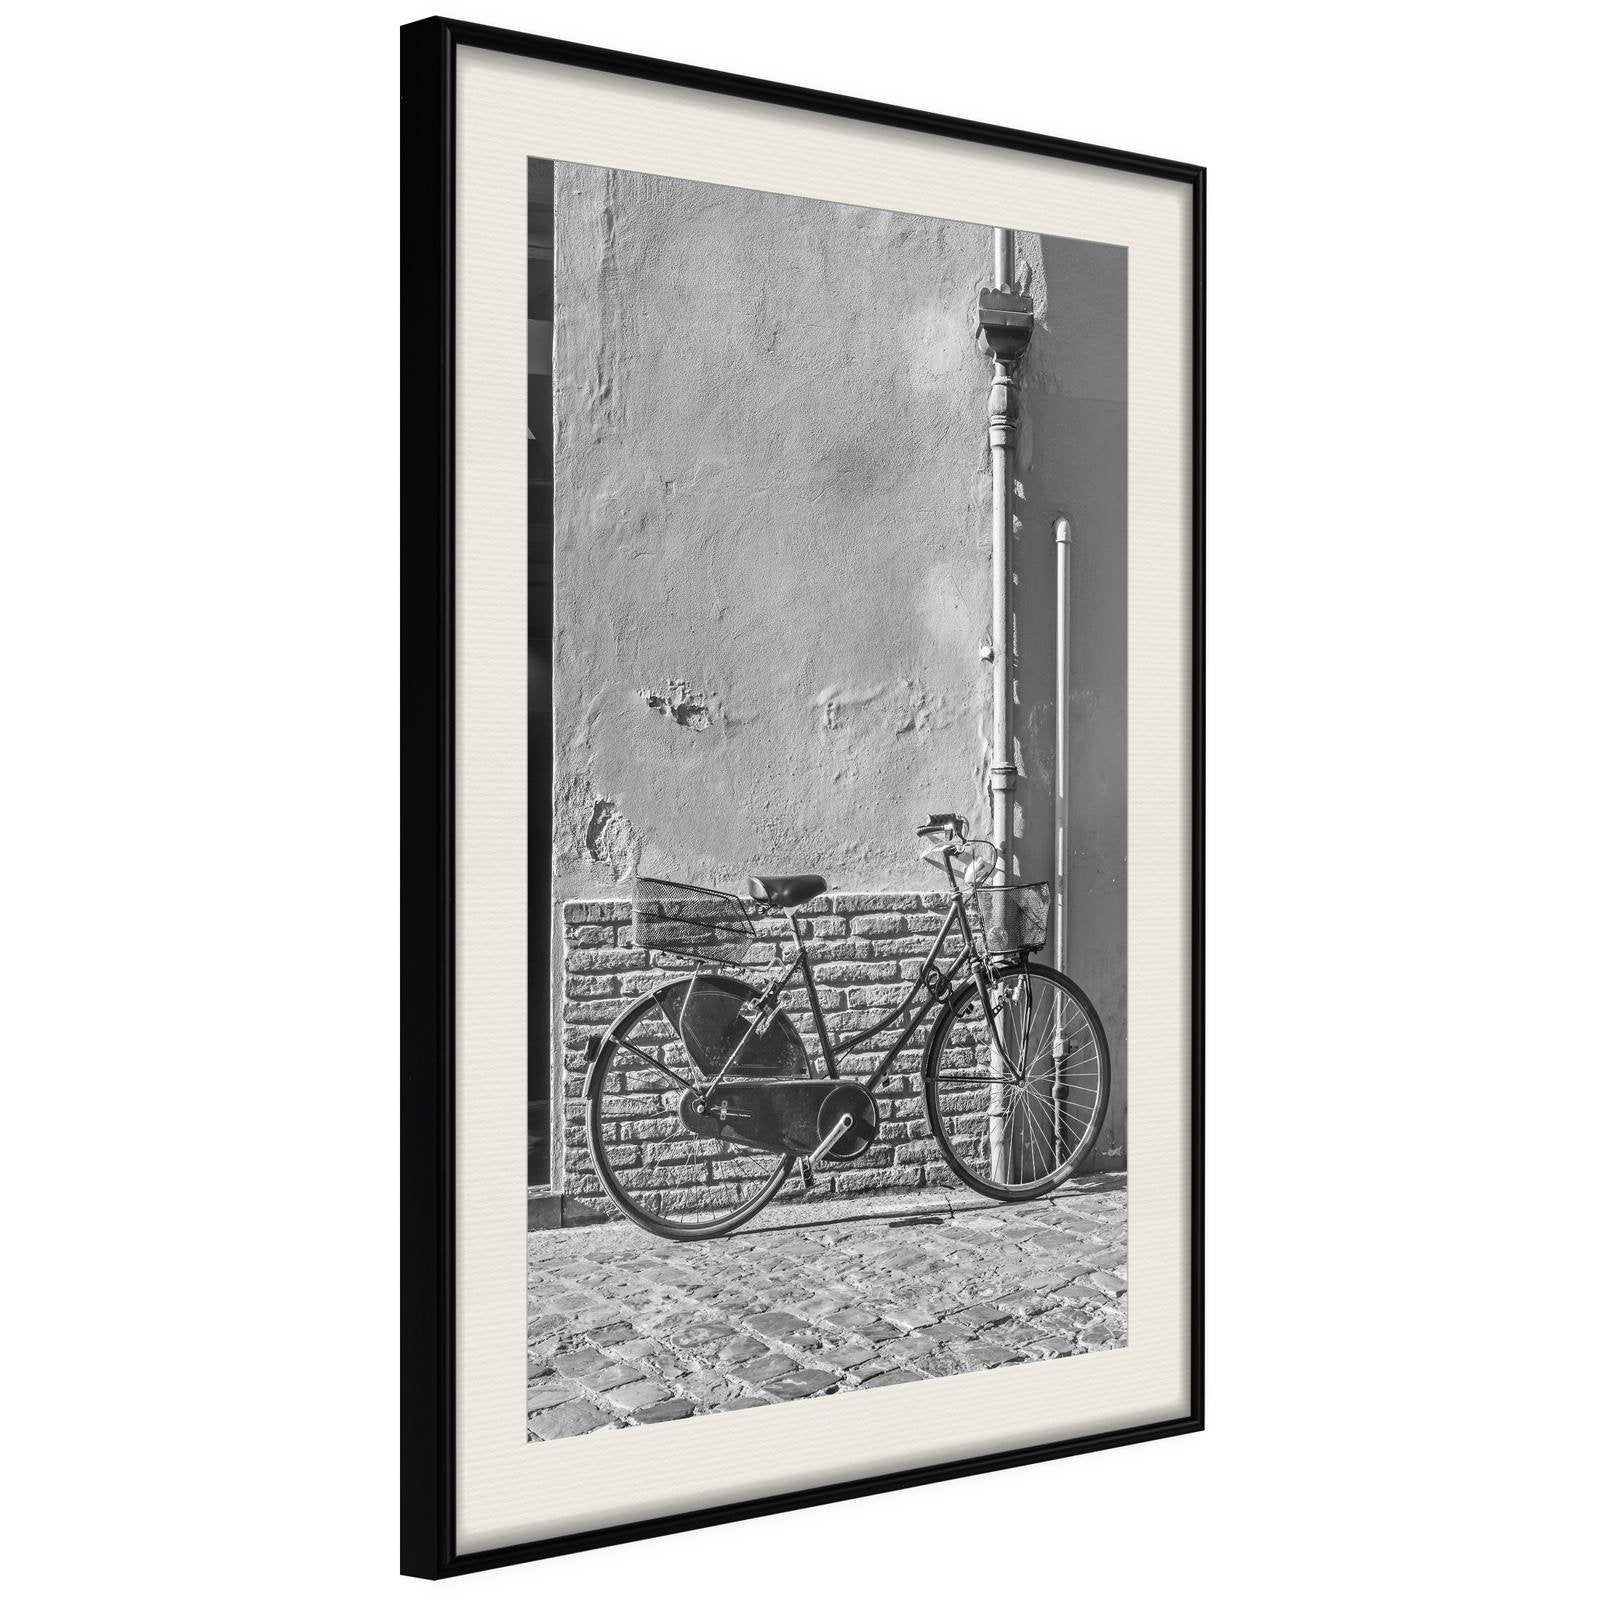 Inramad Poster / Tavla - Bicycle with Black Tires-Poster Inramad-Artgeist-20x30-Svart ram med passepartout-peaceofhome.se